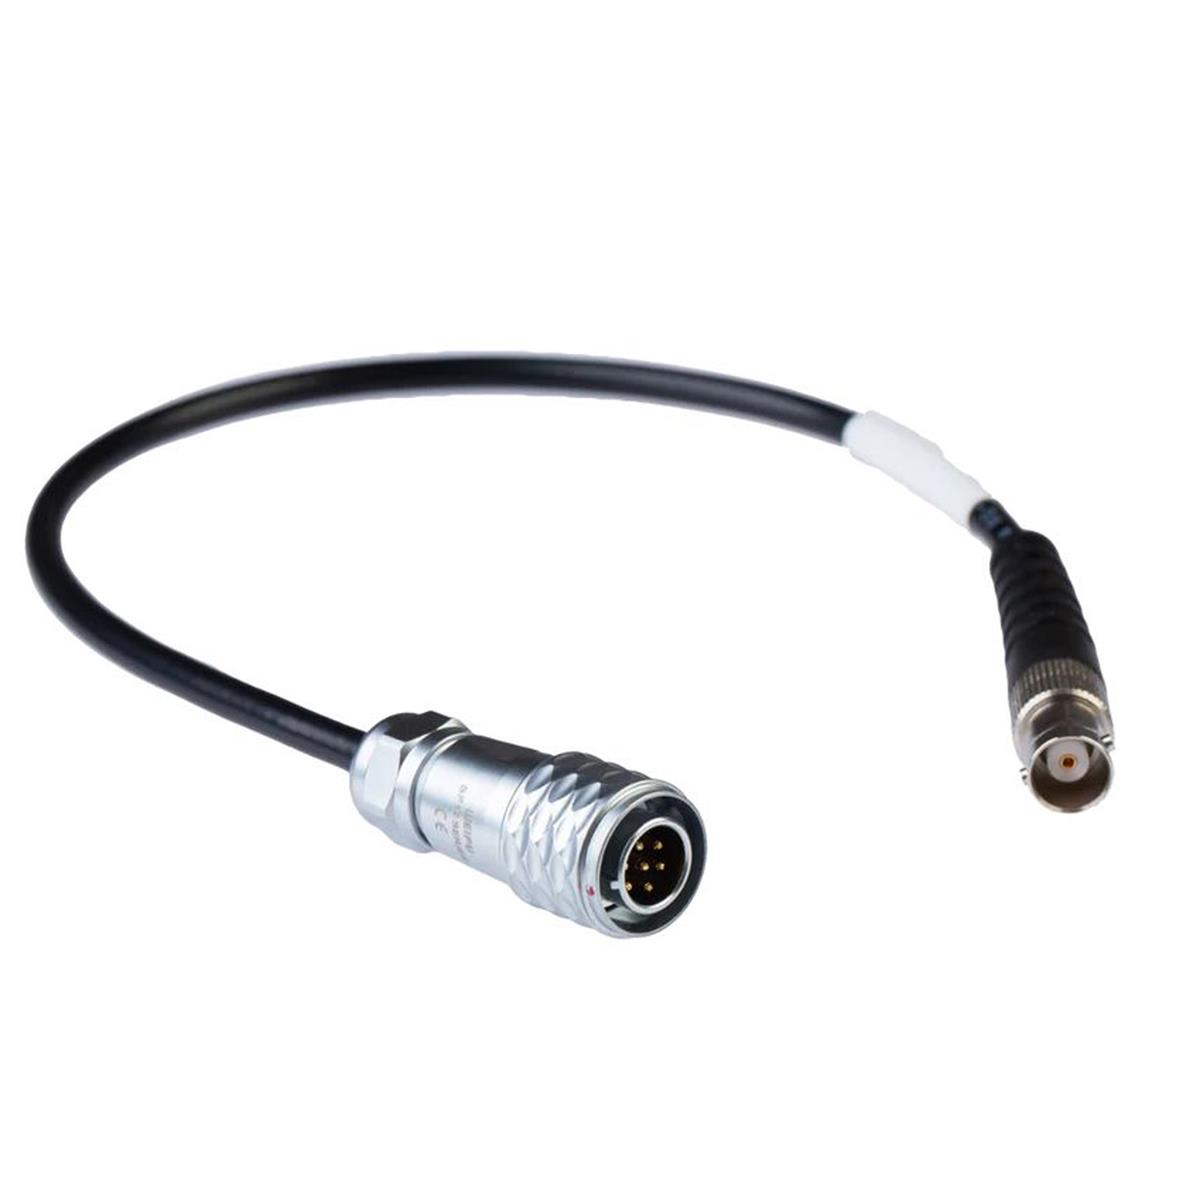 Image of Creamsource Direct Sync Input Cable with BNC Jack Connector